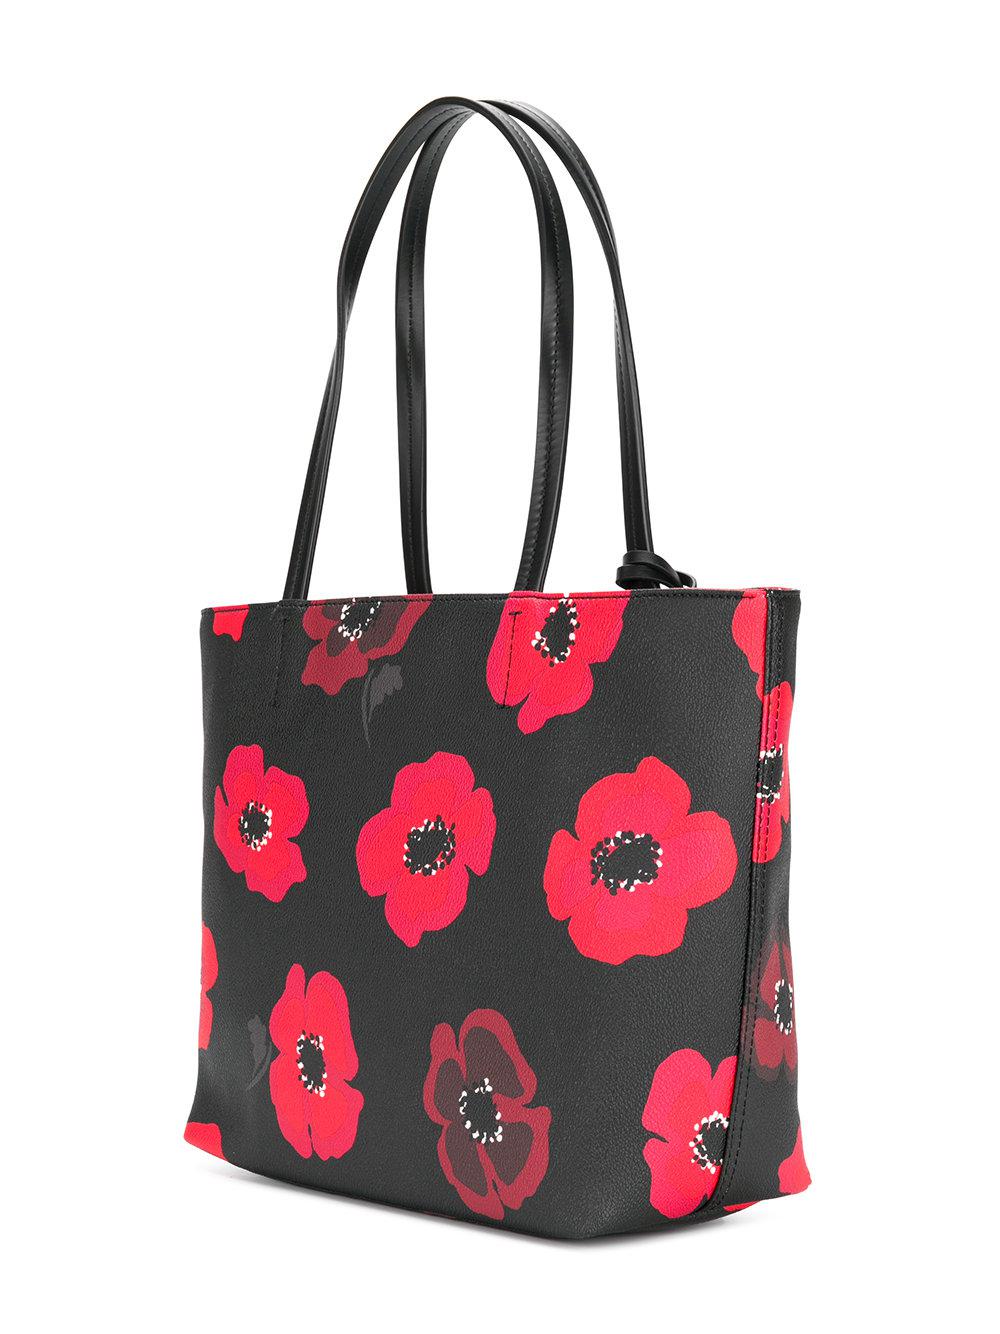 Kate Spade Leather Floral Shopper Tote in Black | Lyst